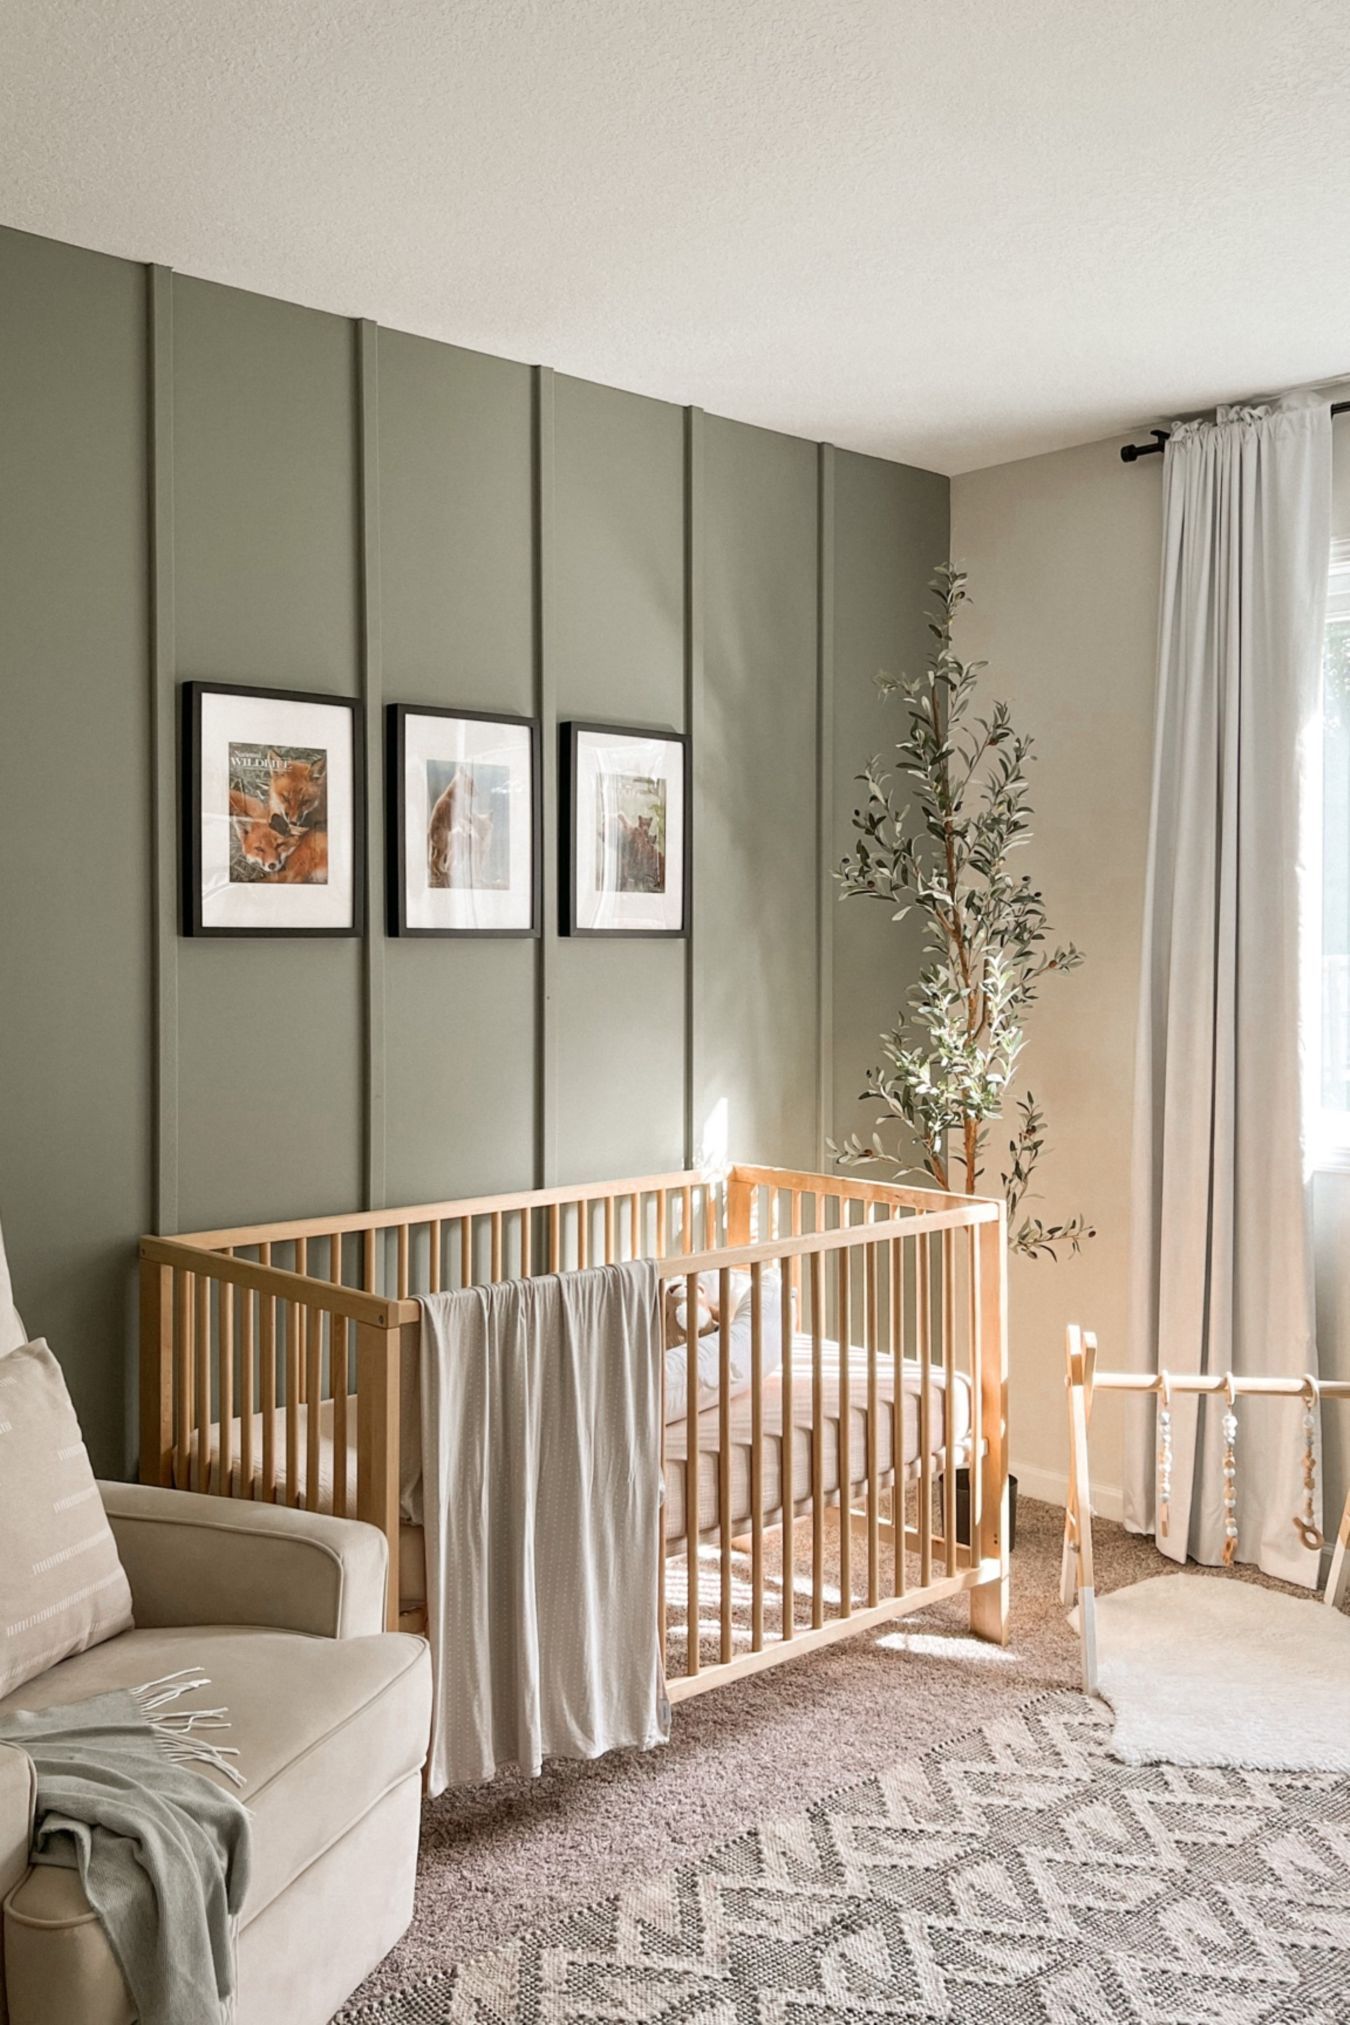 Baby room tips and ideas